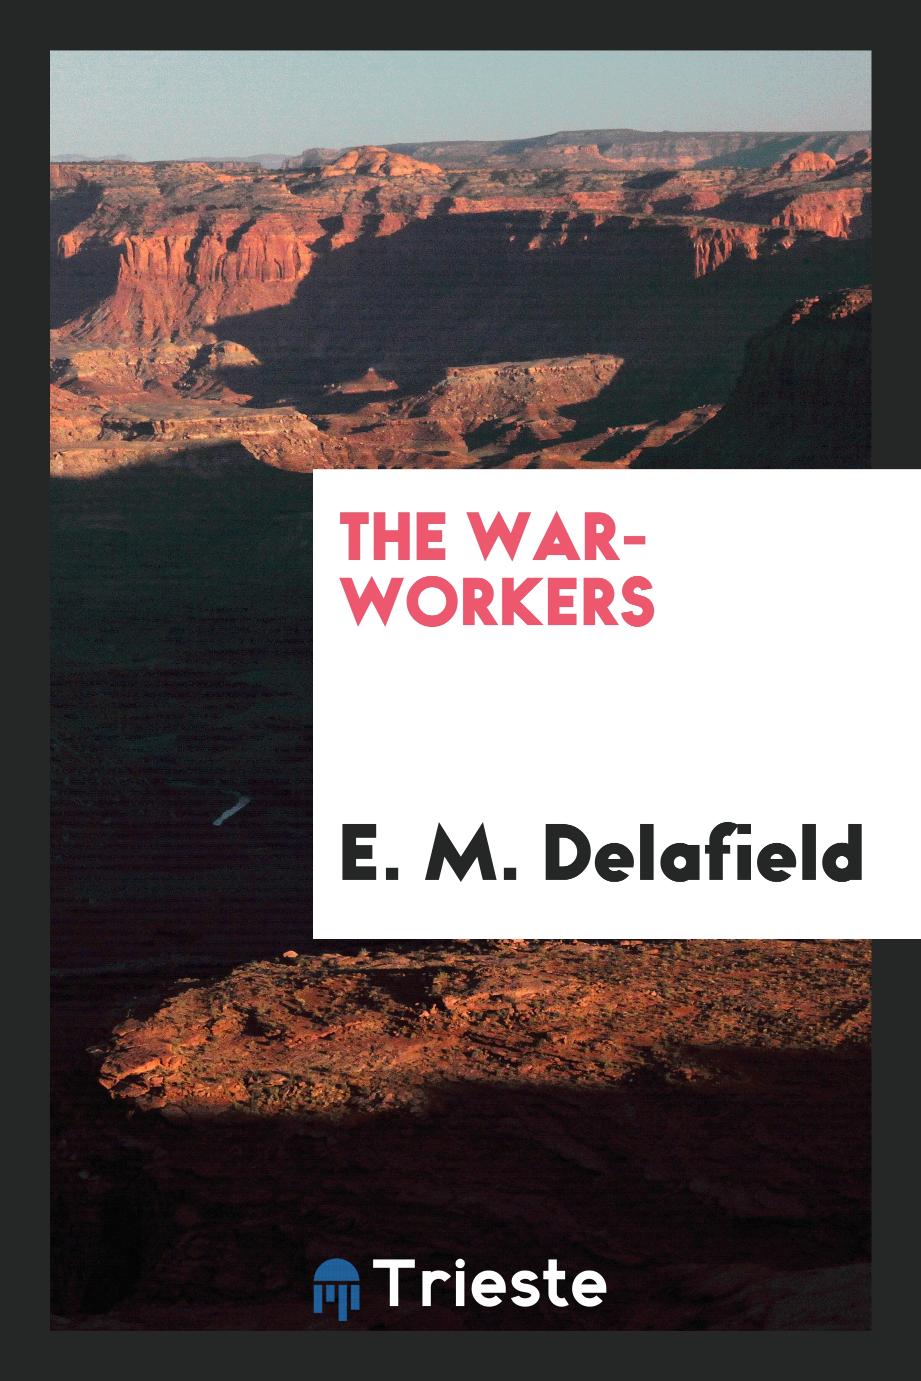 The war-workers